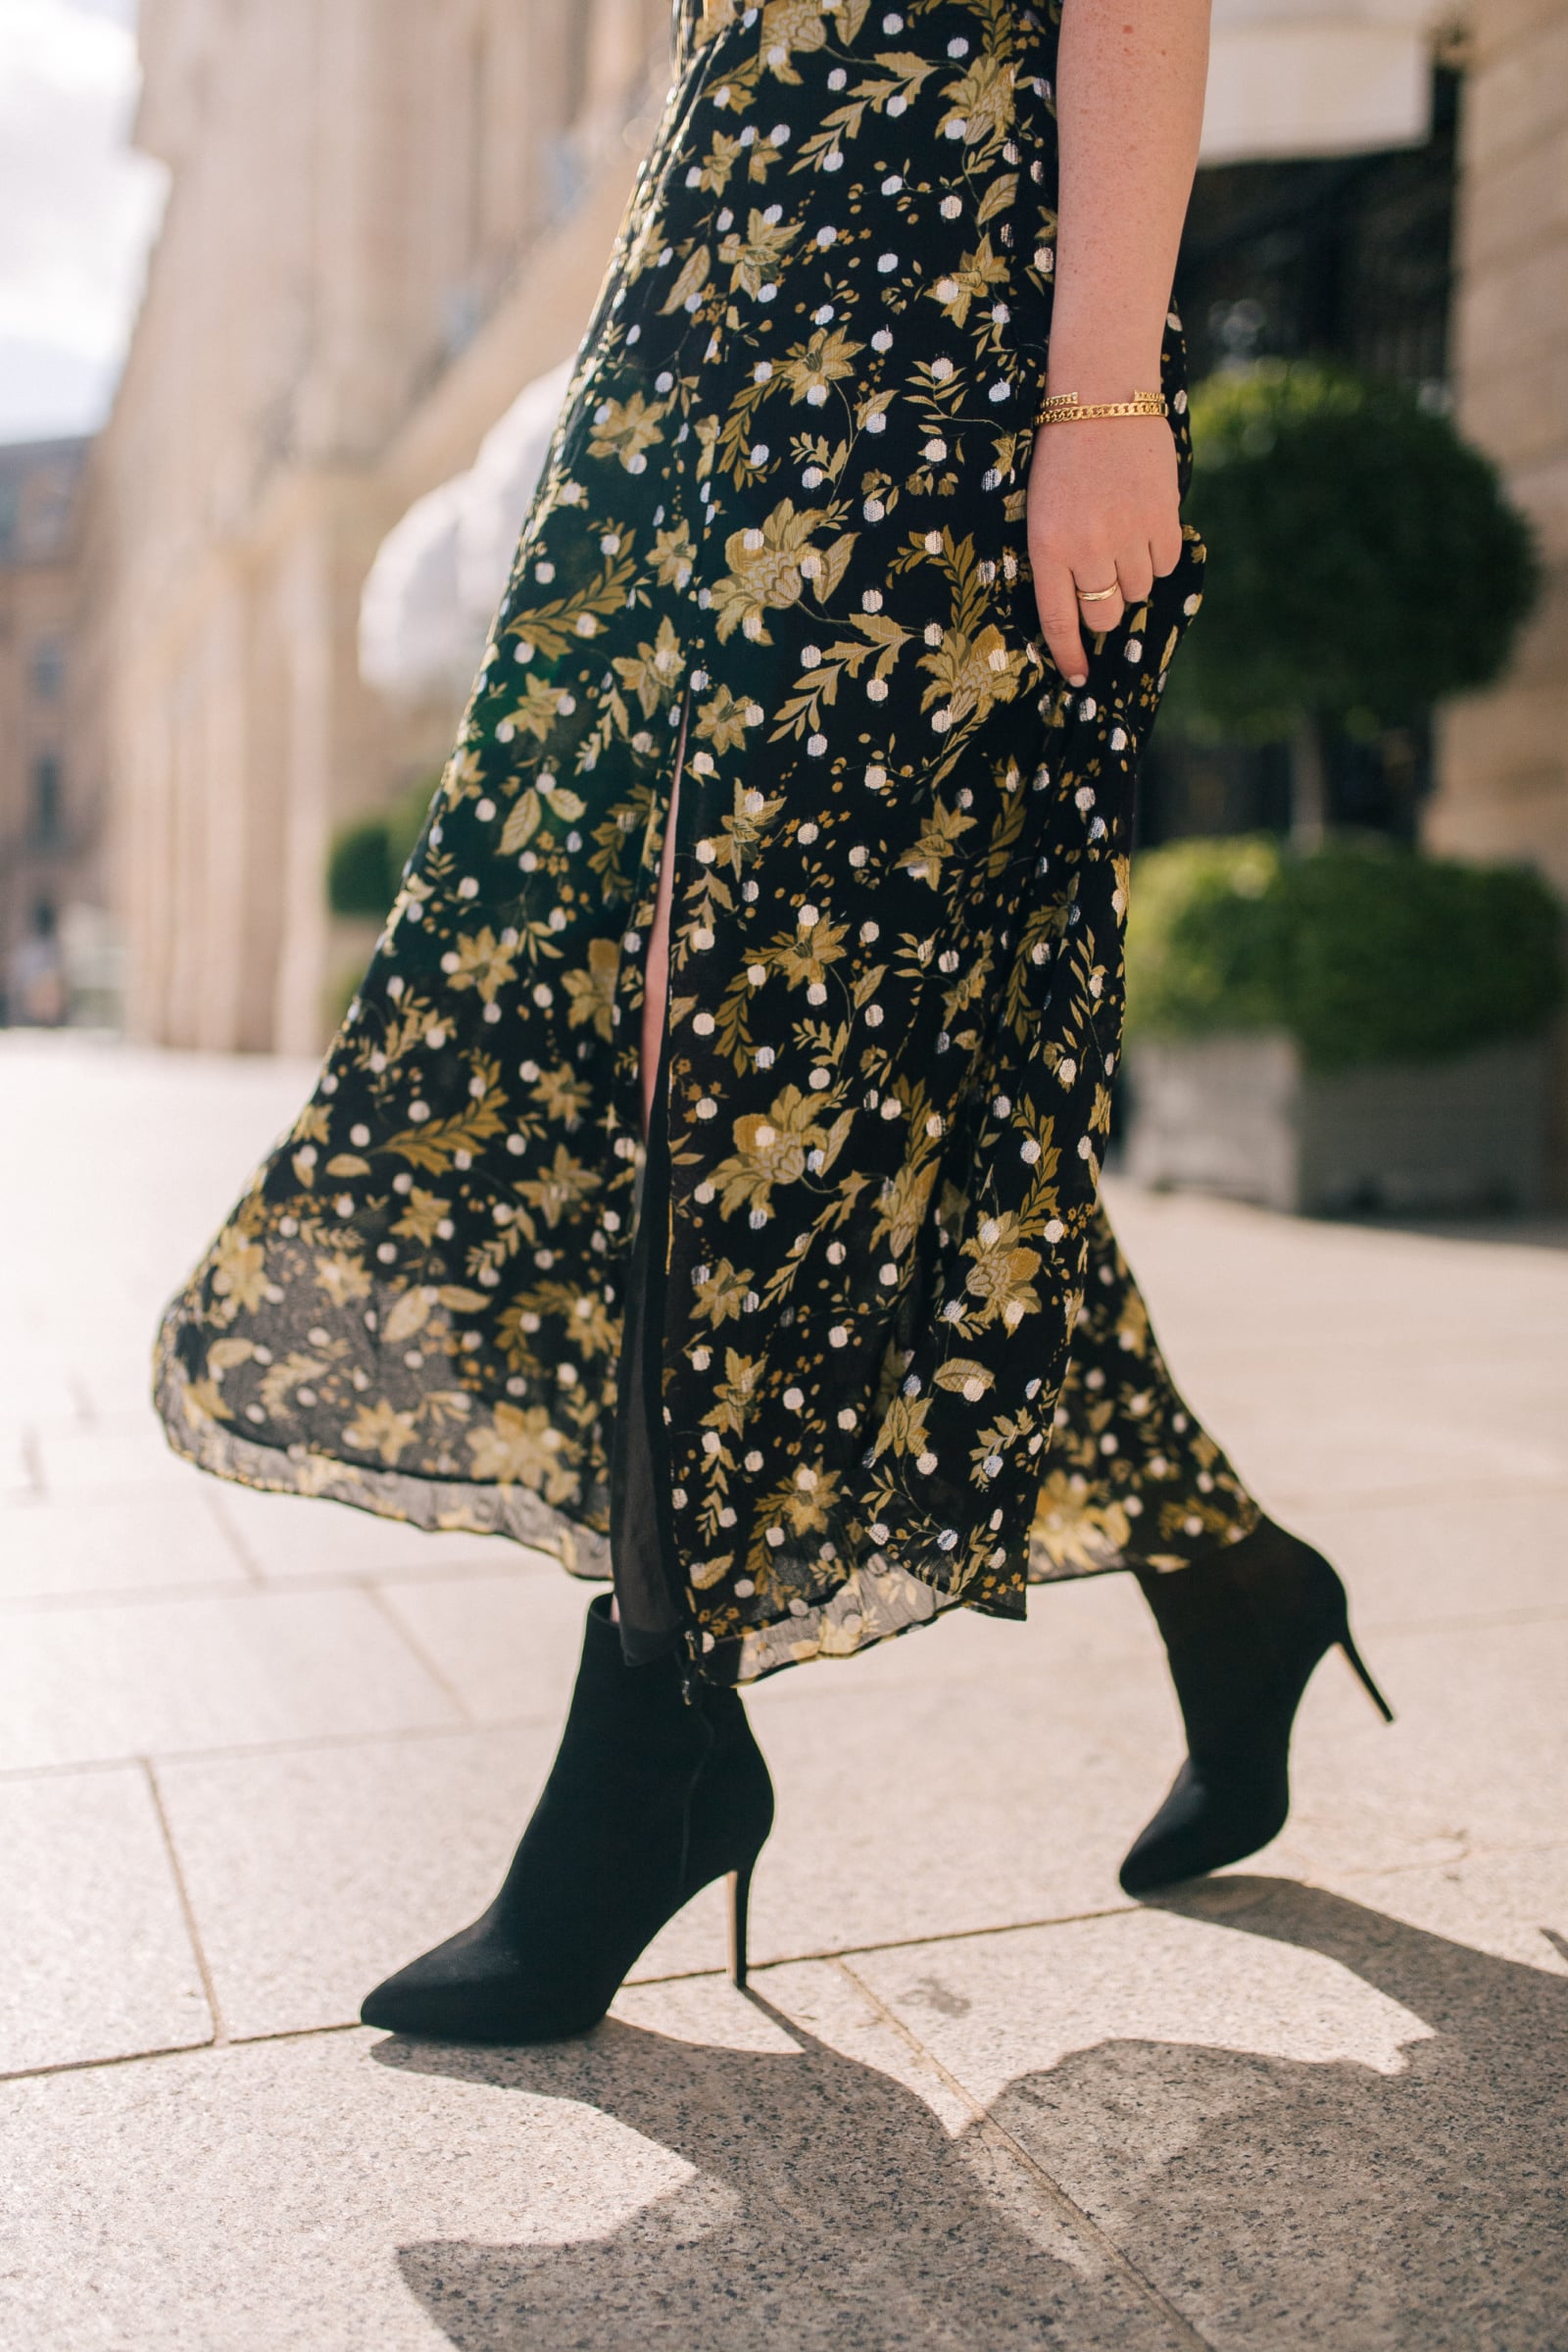 Sarah Flint Dress Bootie | A Roundup of My Favorite Boots and Booties